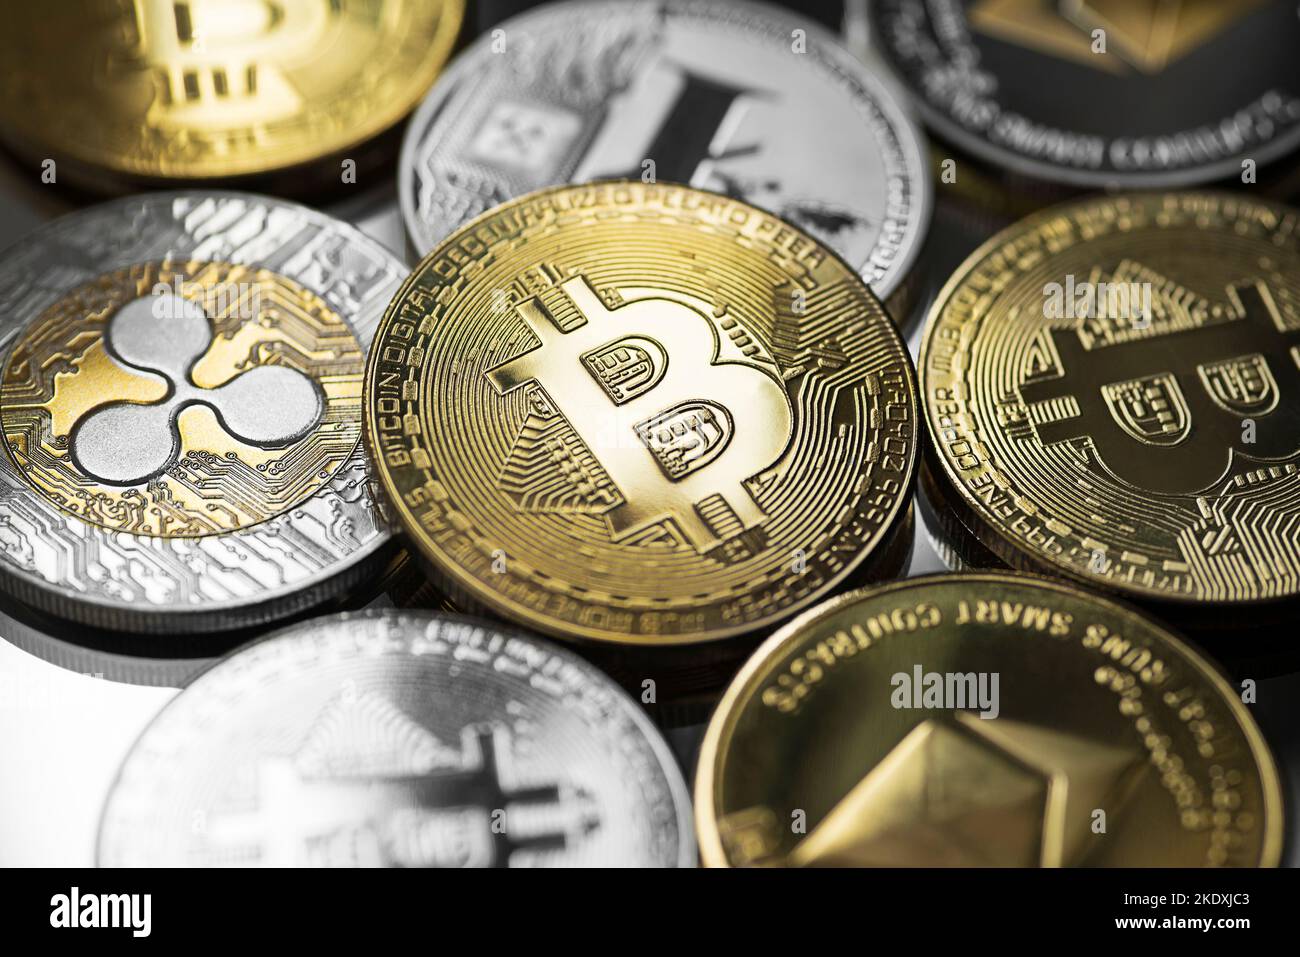 Bitcoin and altcoins cryptocurrency close up shoot Stock Photo